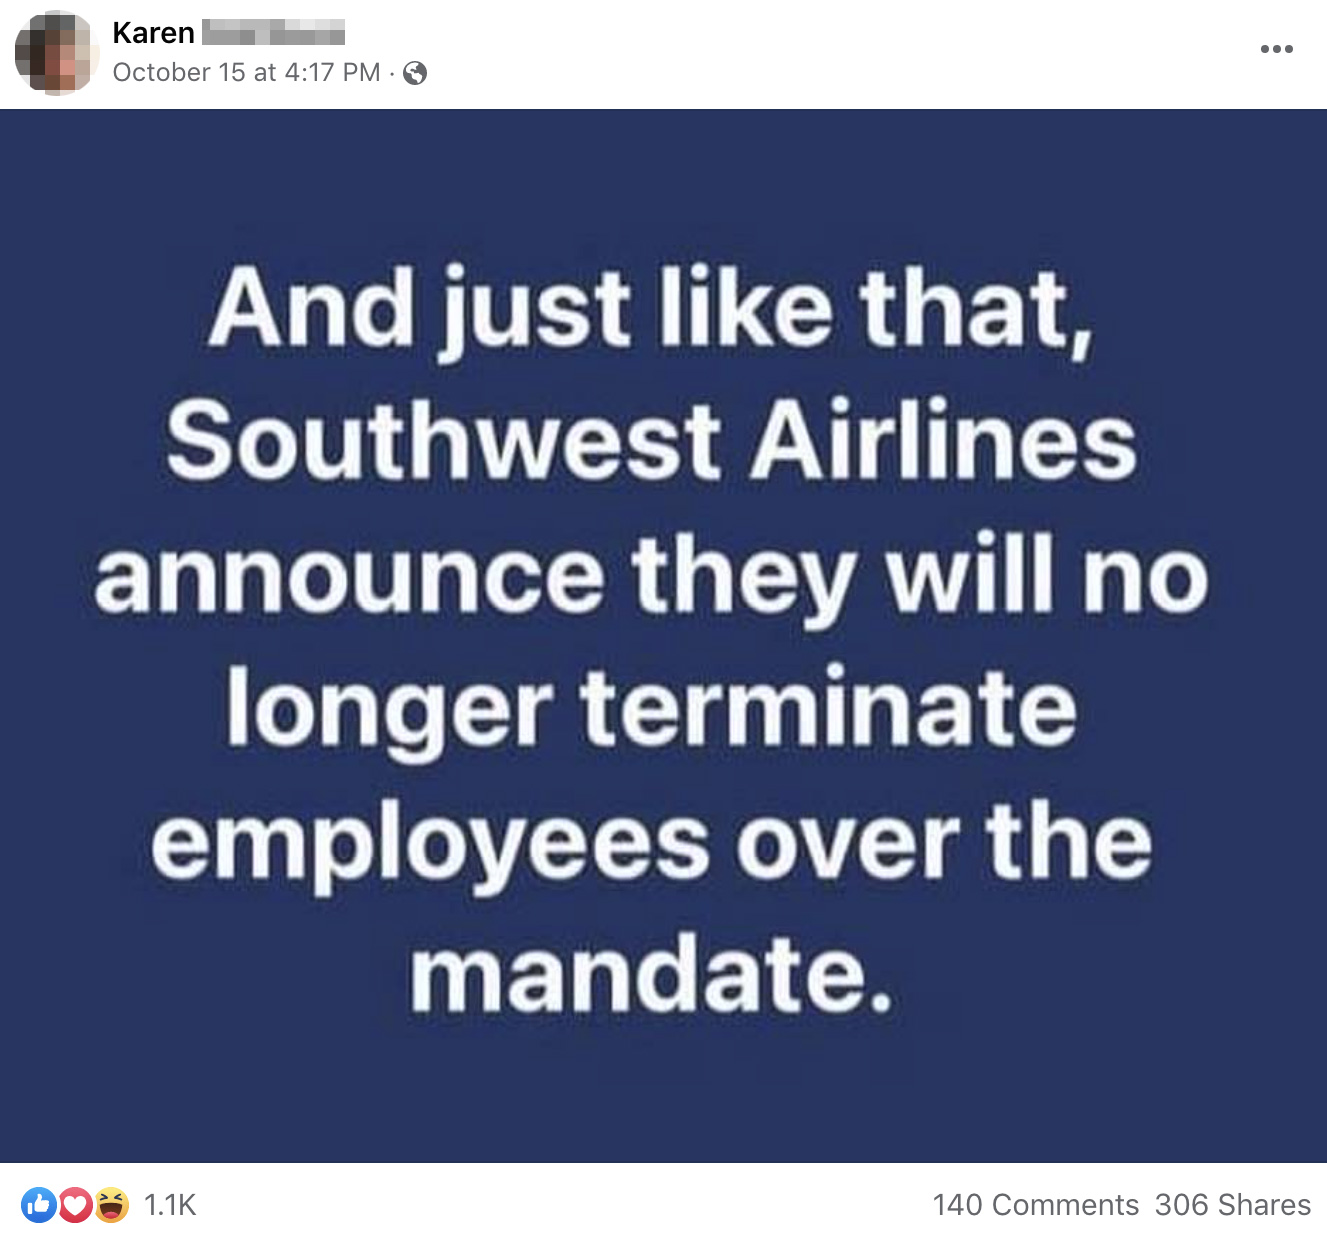 A Facebook meme post falsely claimed that just like that Southwest Airlines announce they will no longer terminate employees over the vaccine mandate.